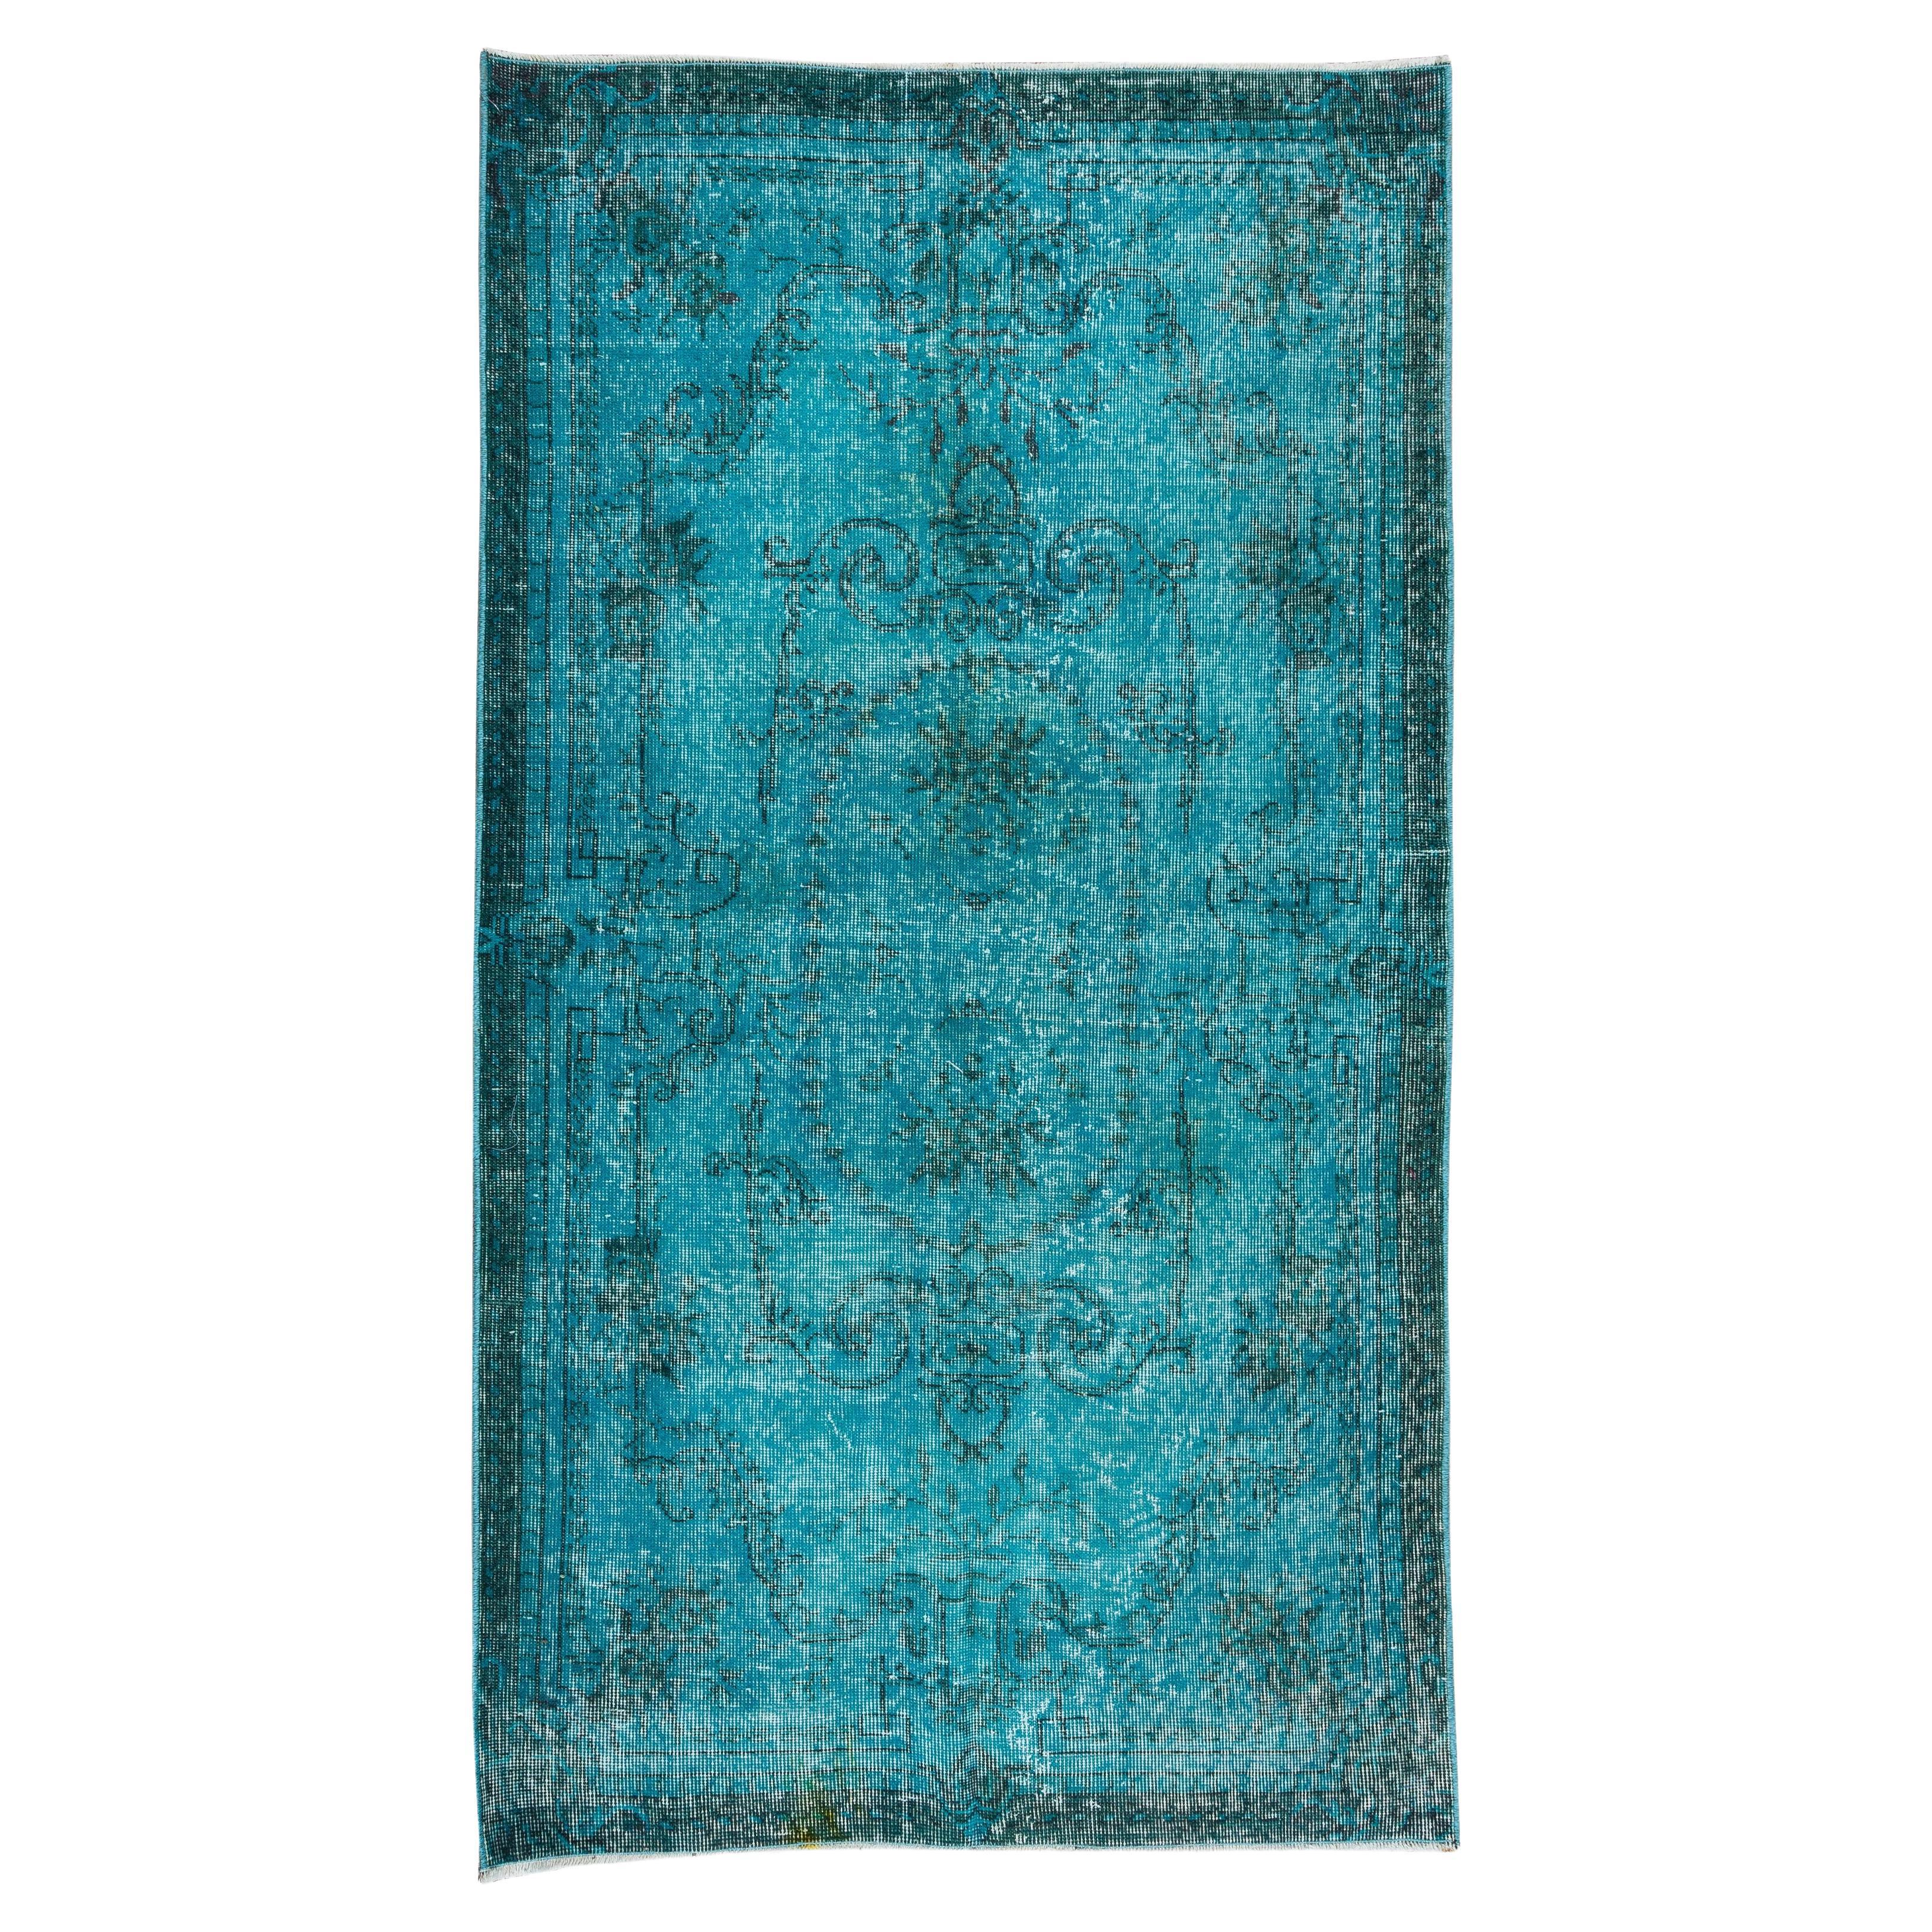 Handmade Turkish Rug in Teal Blue & Turquoise, Ideal 4 Modern Interiors